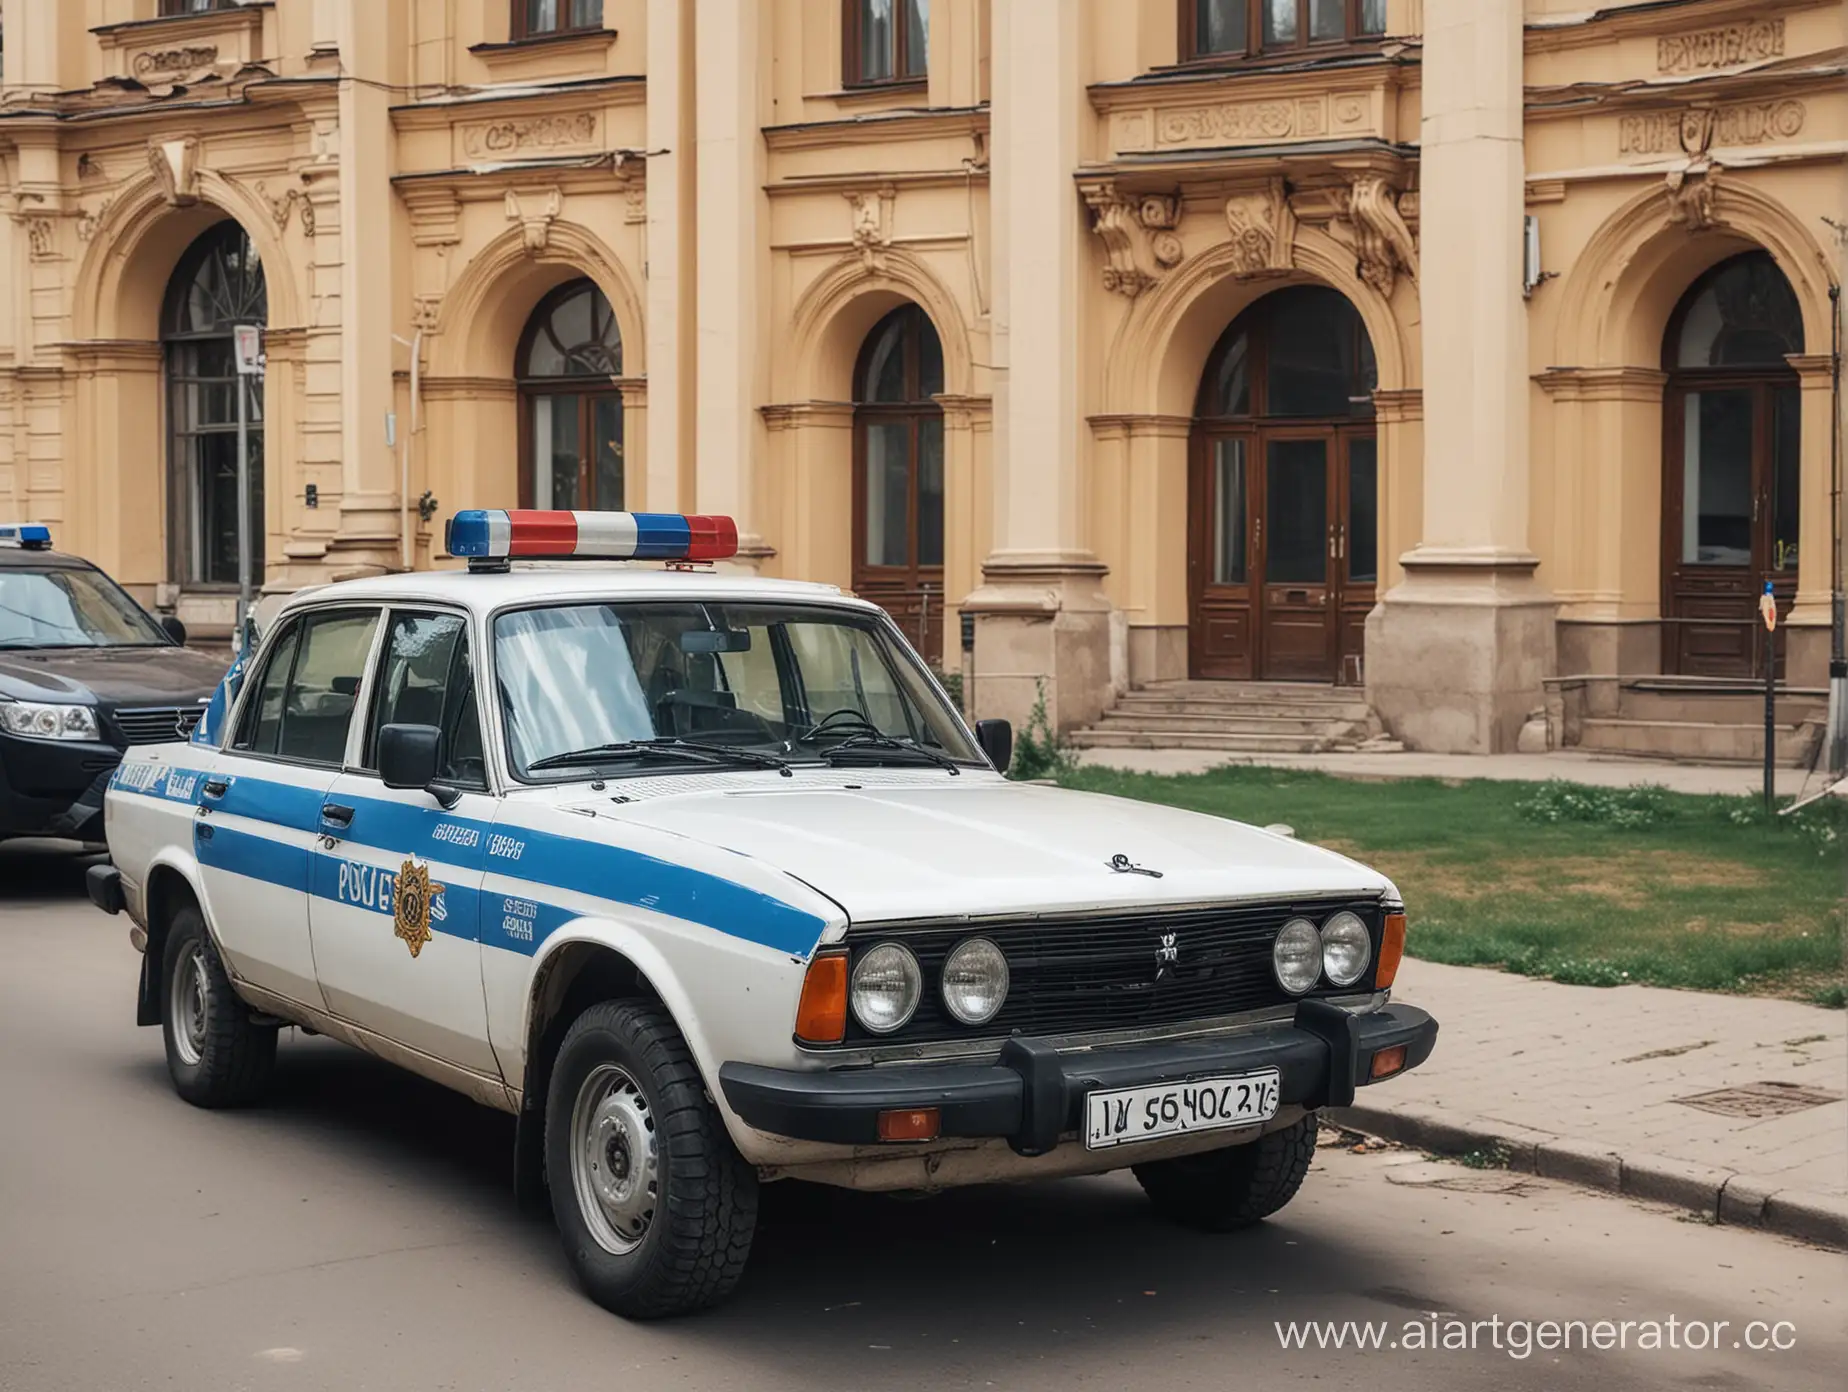 russian police car in college background